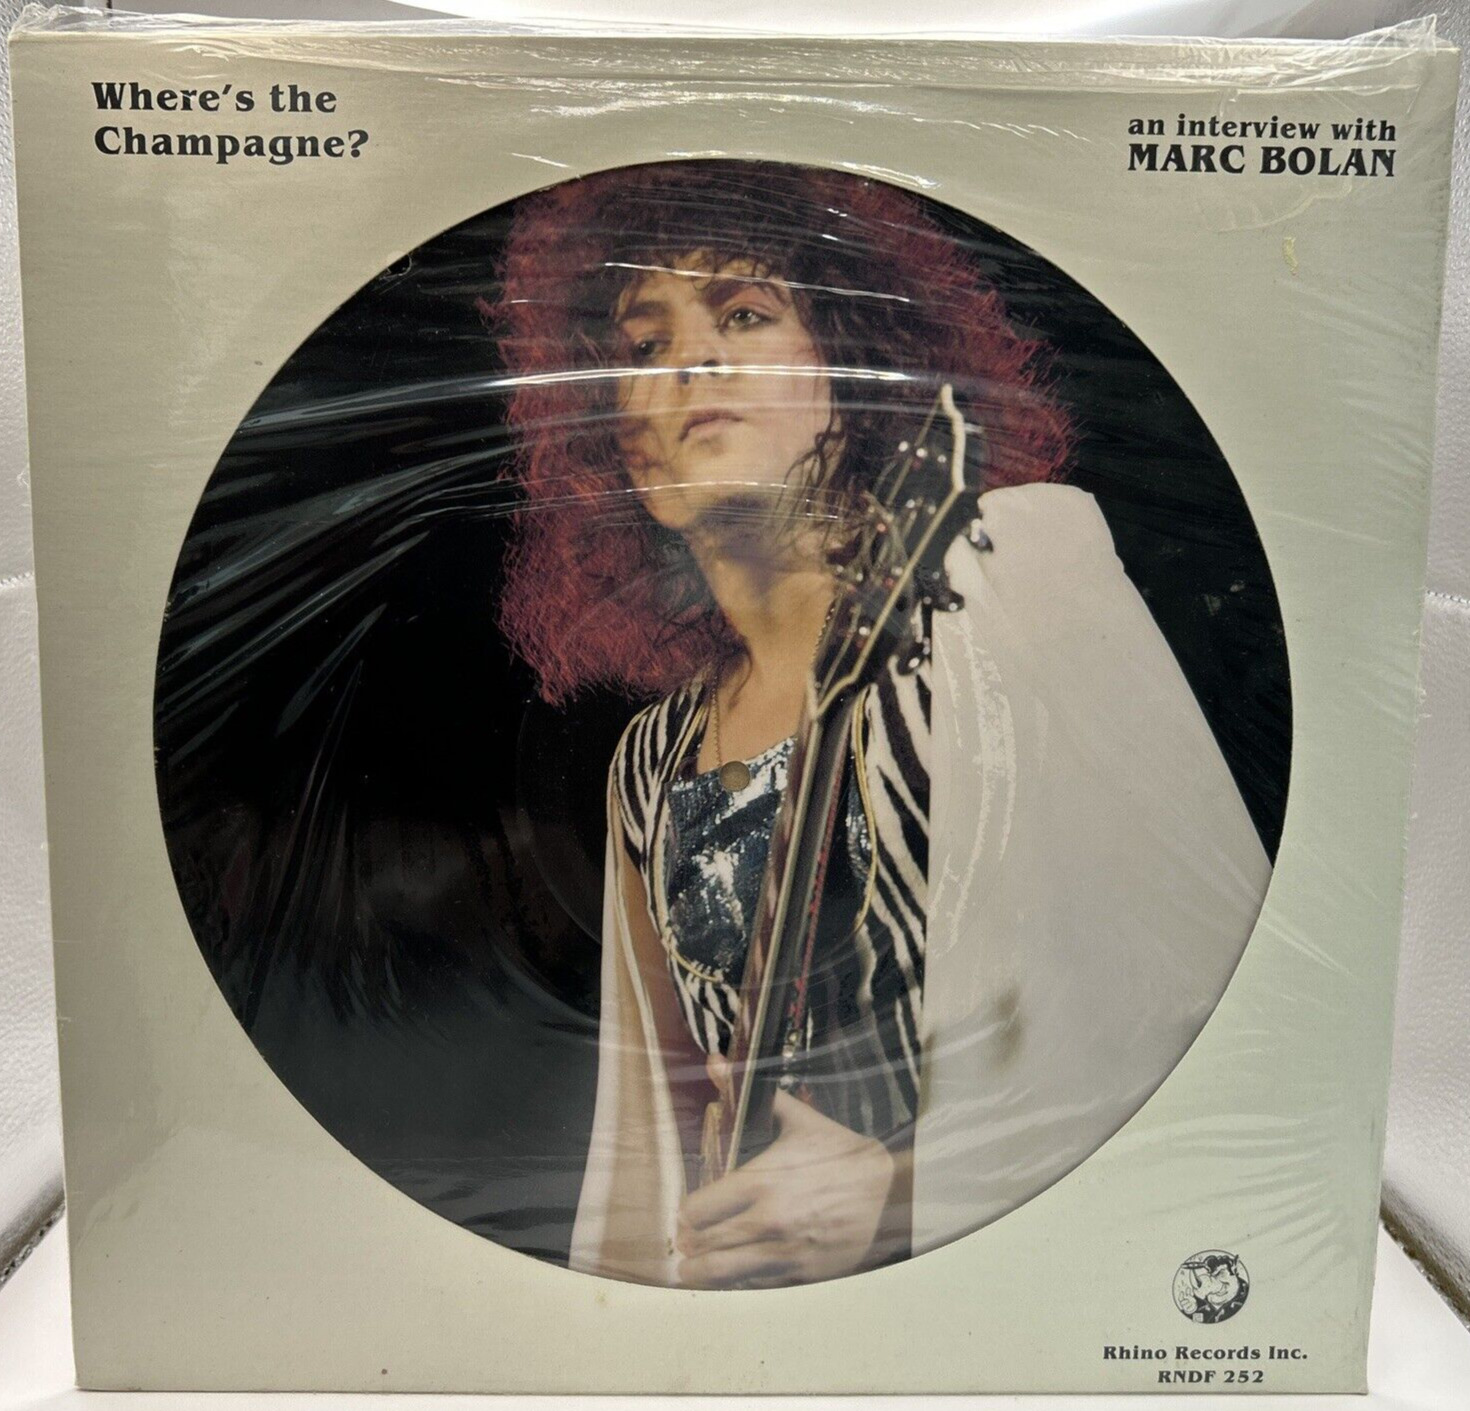 MARC BOLAN Interview: Where's the Champagne? LP 1982 Picture Disc RHINO RNDF 252